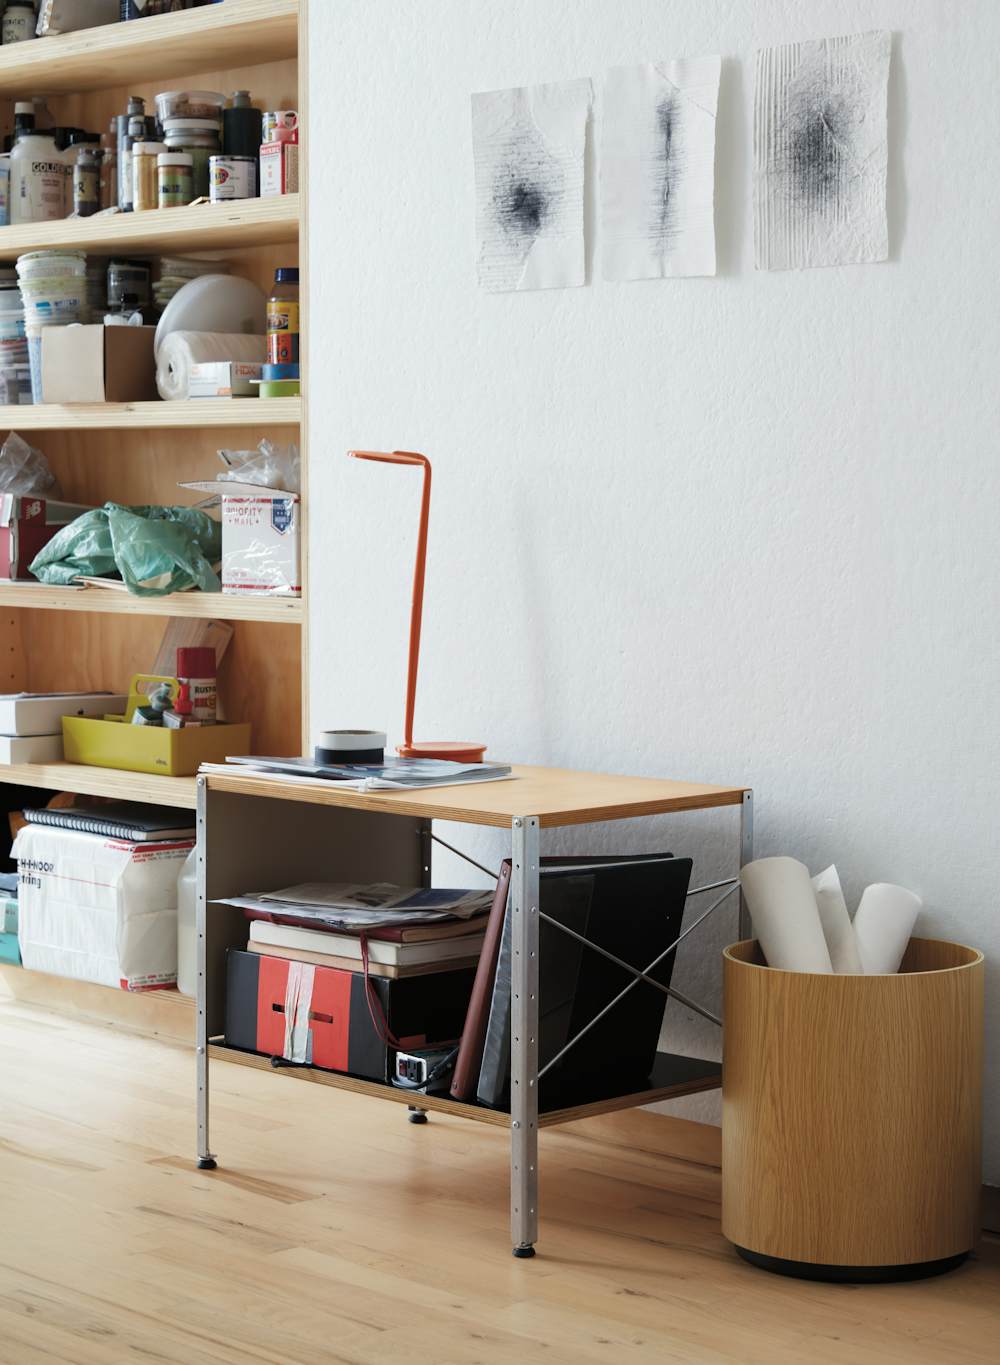 Eames Storage Unit 1x1 and Pixo Plus Table Lamp in a home office setting